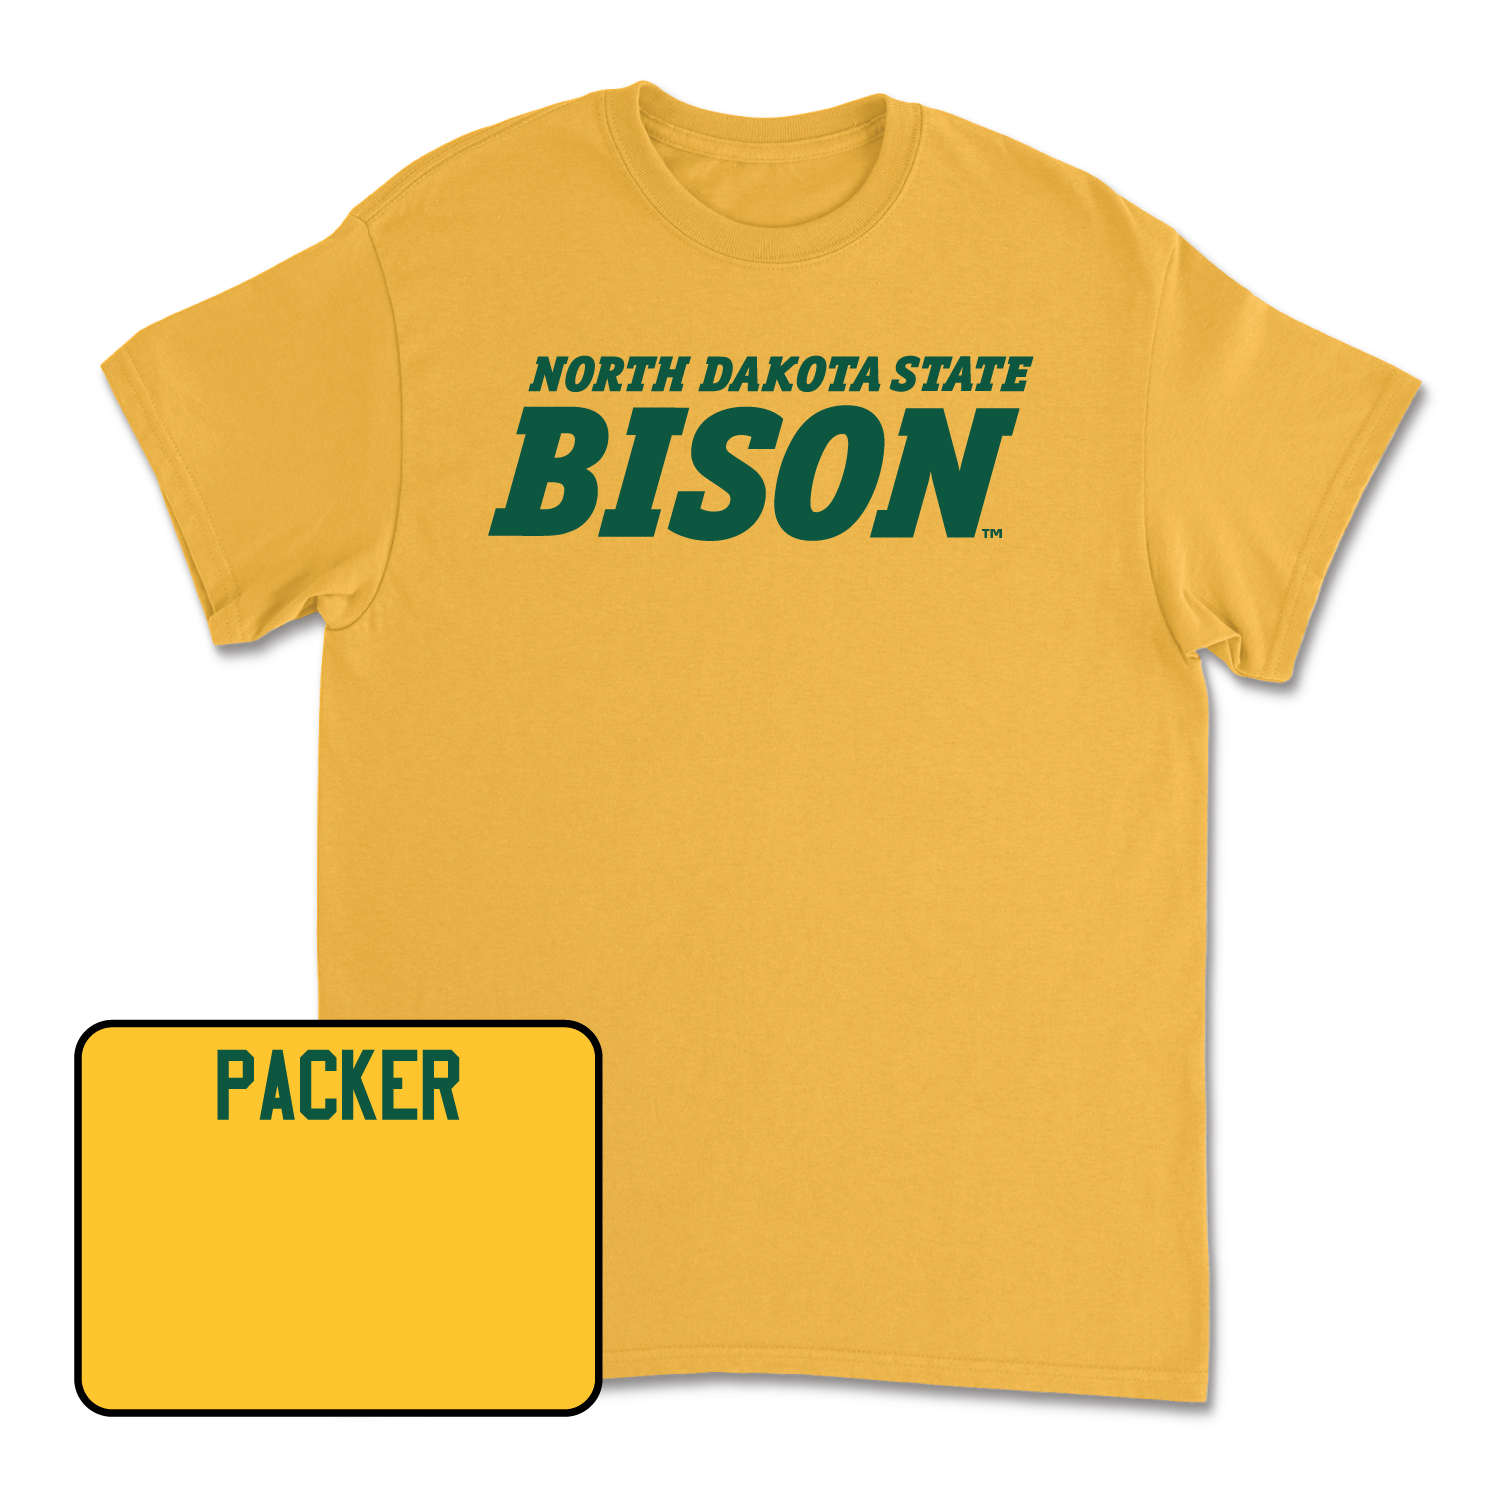 Gold Track & Field Bison Tee X-Large / Jack Packer